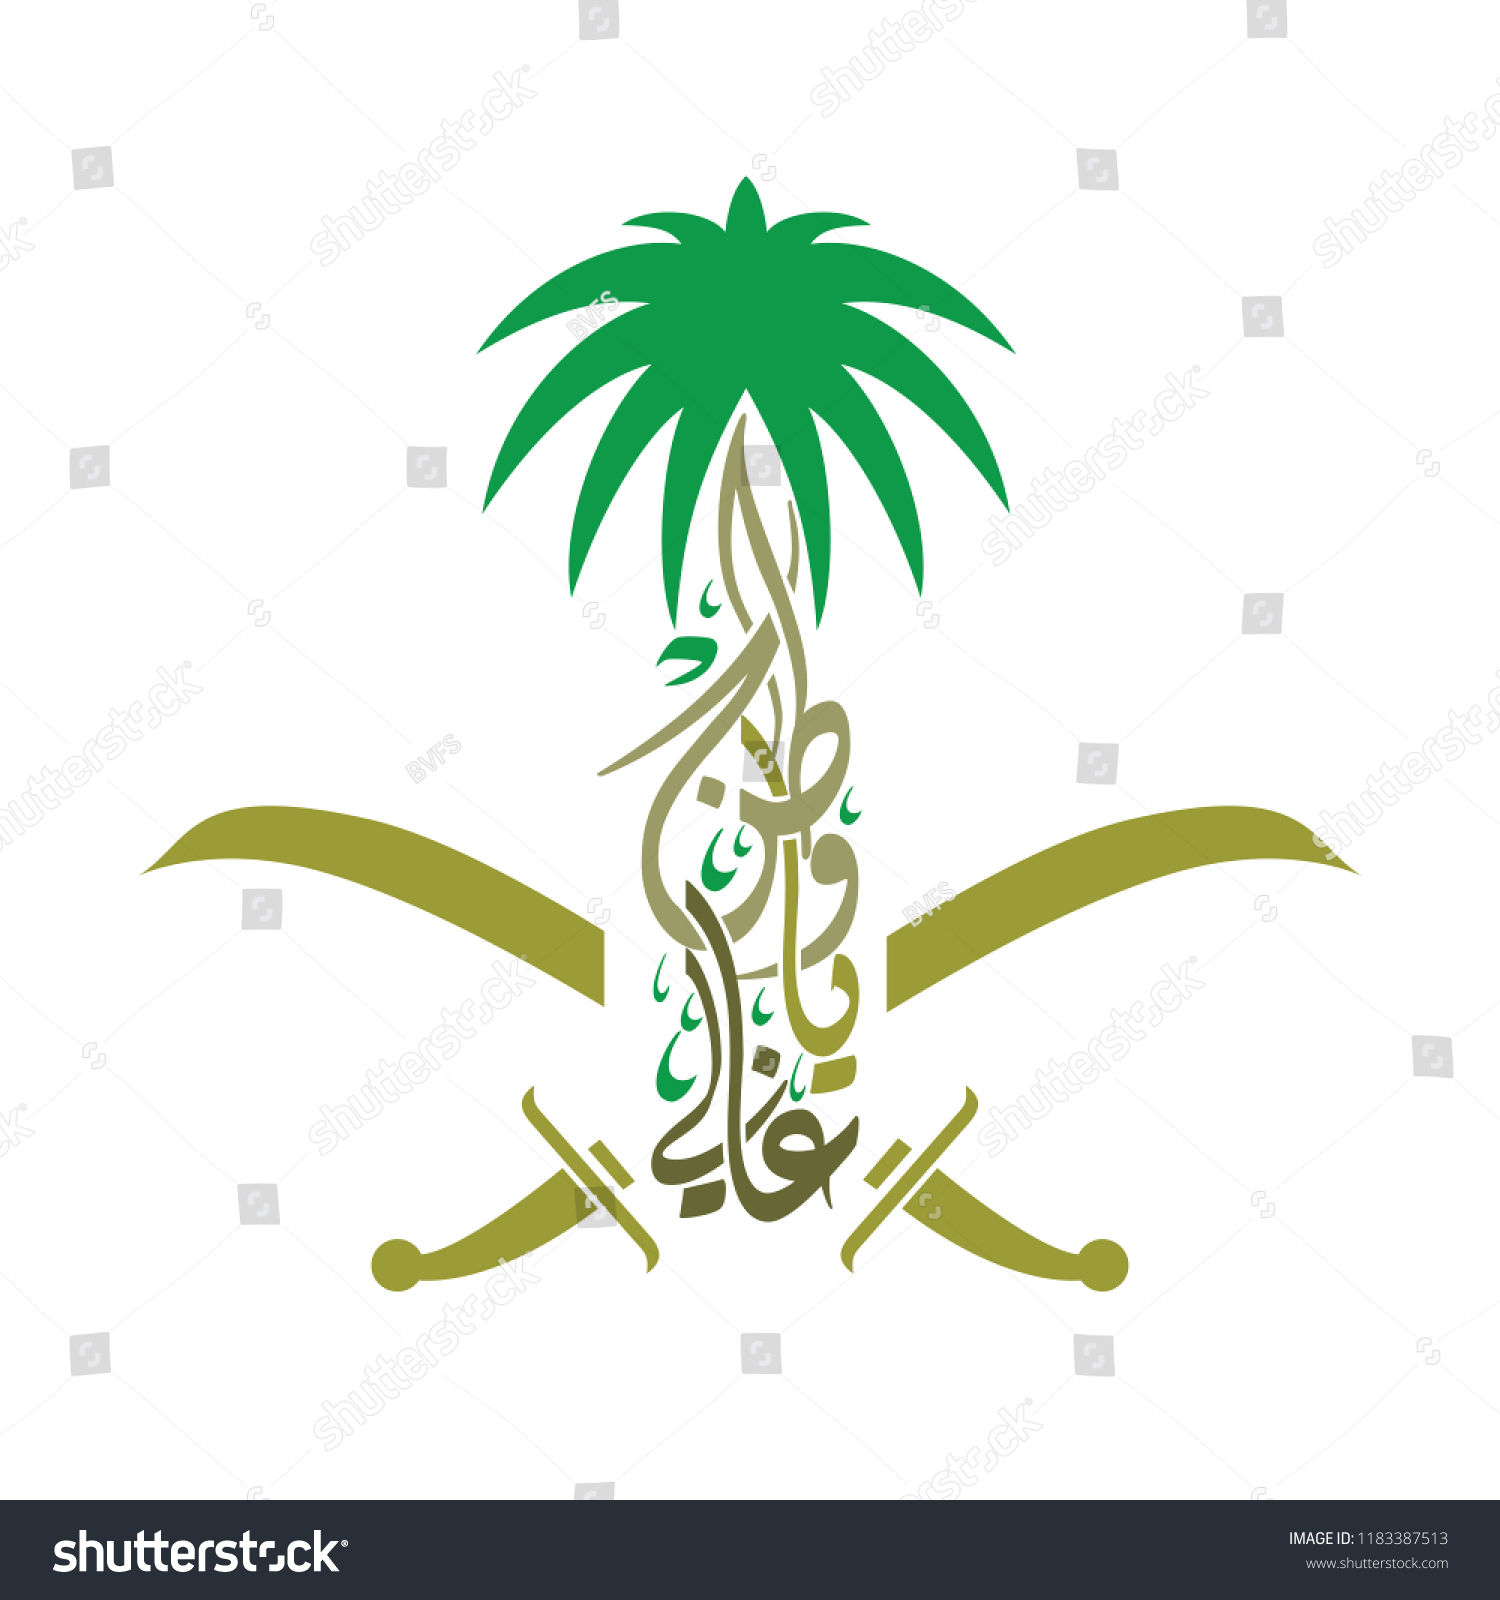 Arabic Calligraphy Palm Two Swords Design Stock Vector (Royalty Free ...